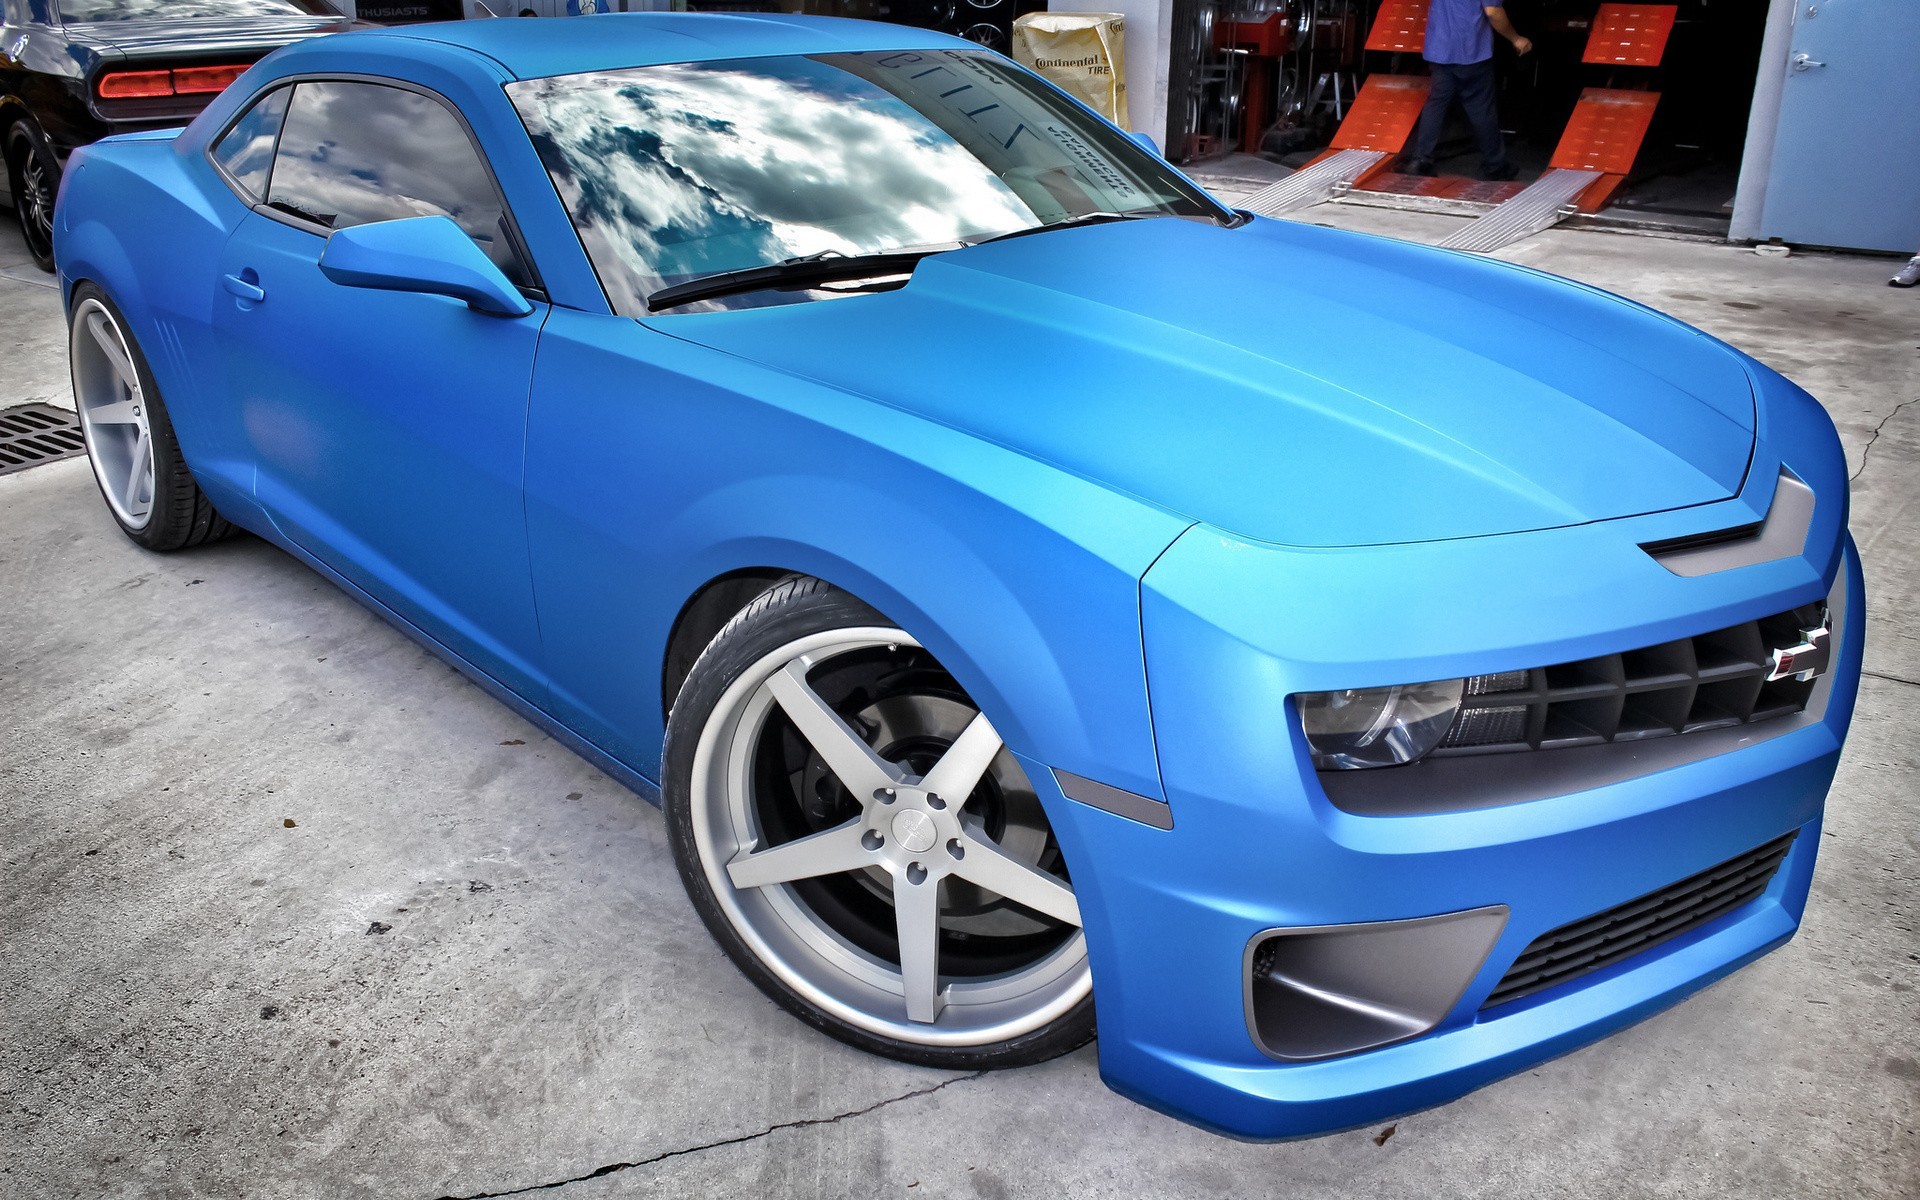 General 1920x1200 car Chevrolet Camaro Chevrolet vehicle blue cars muscle cars American cars